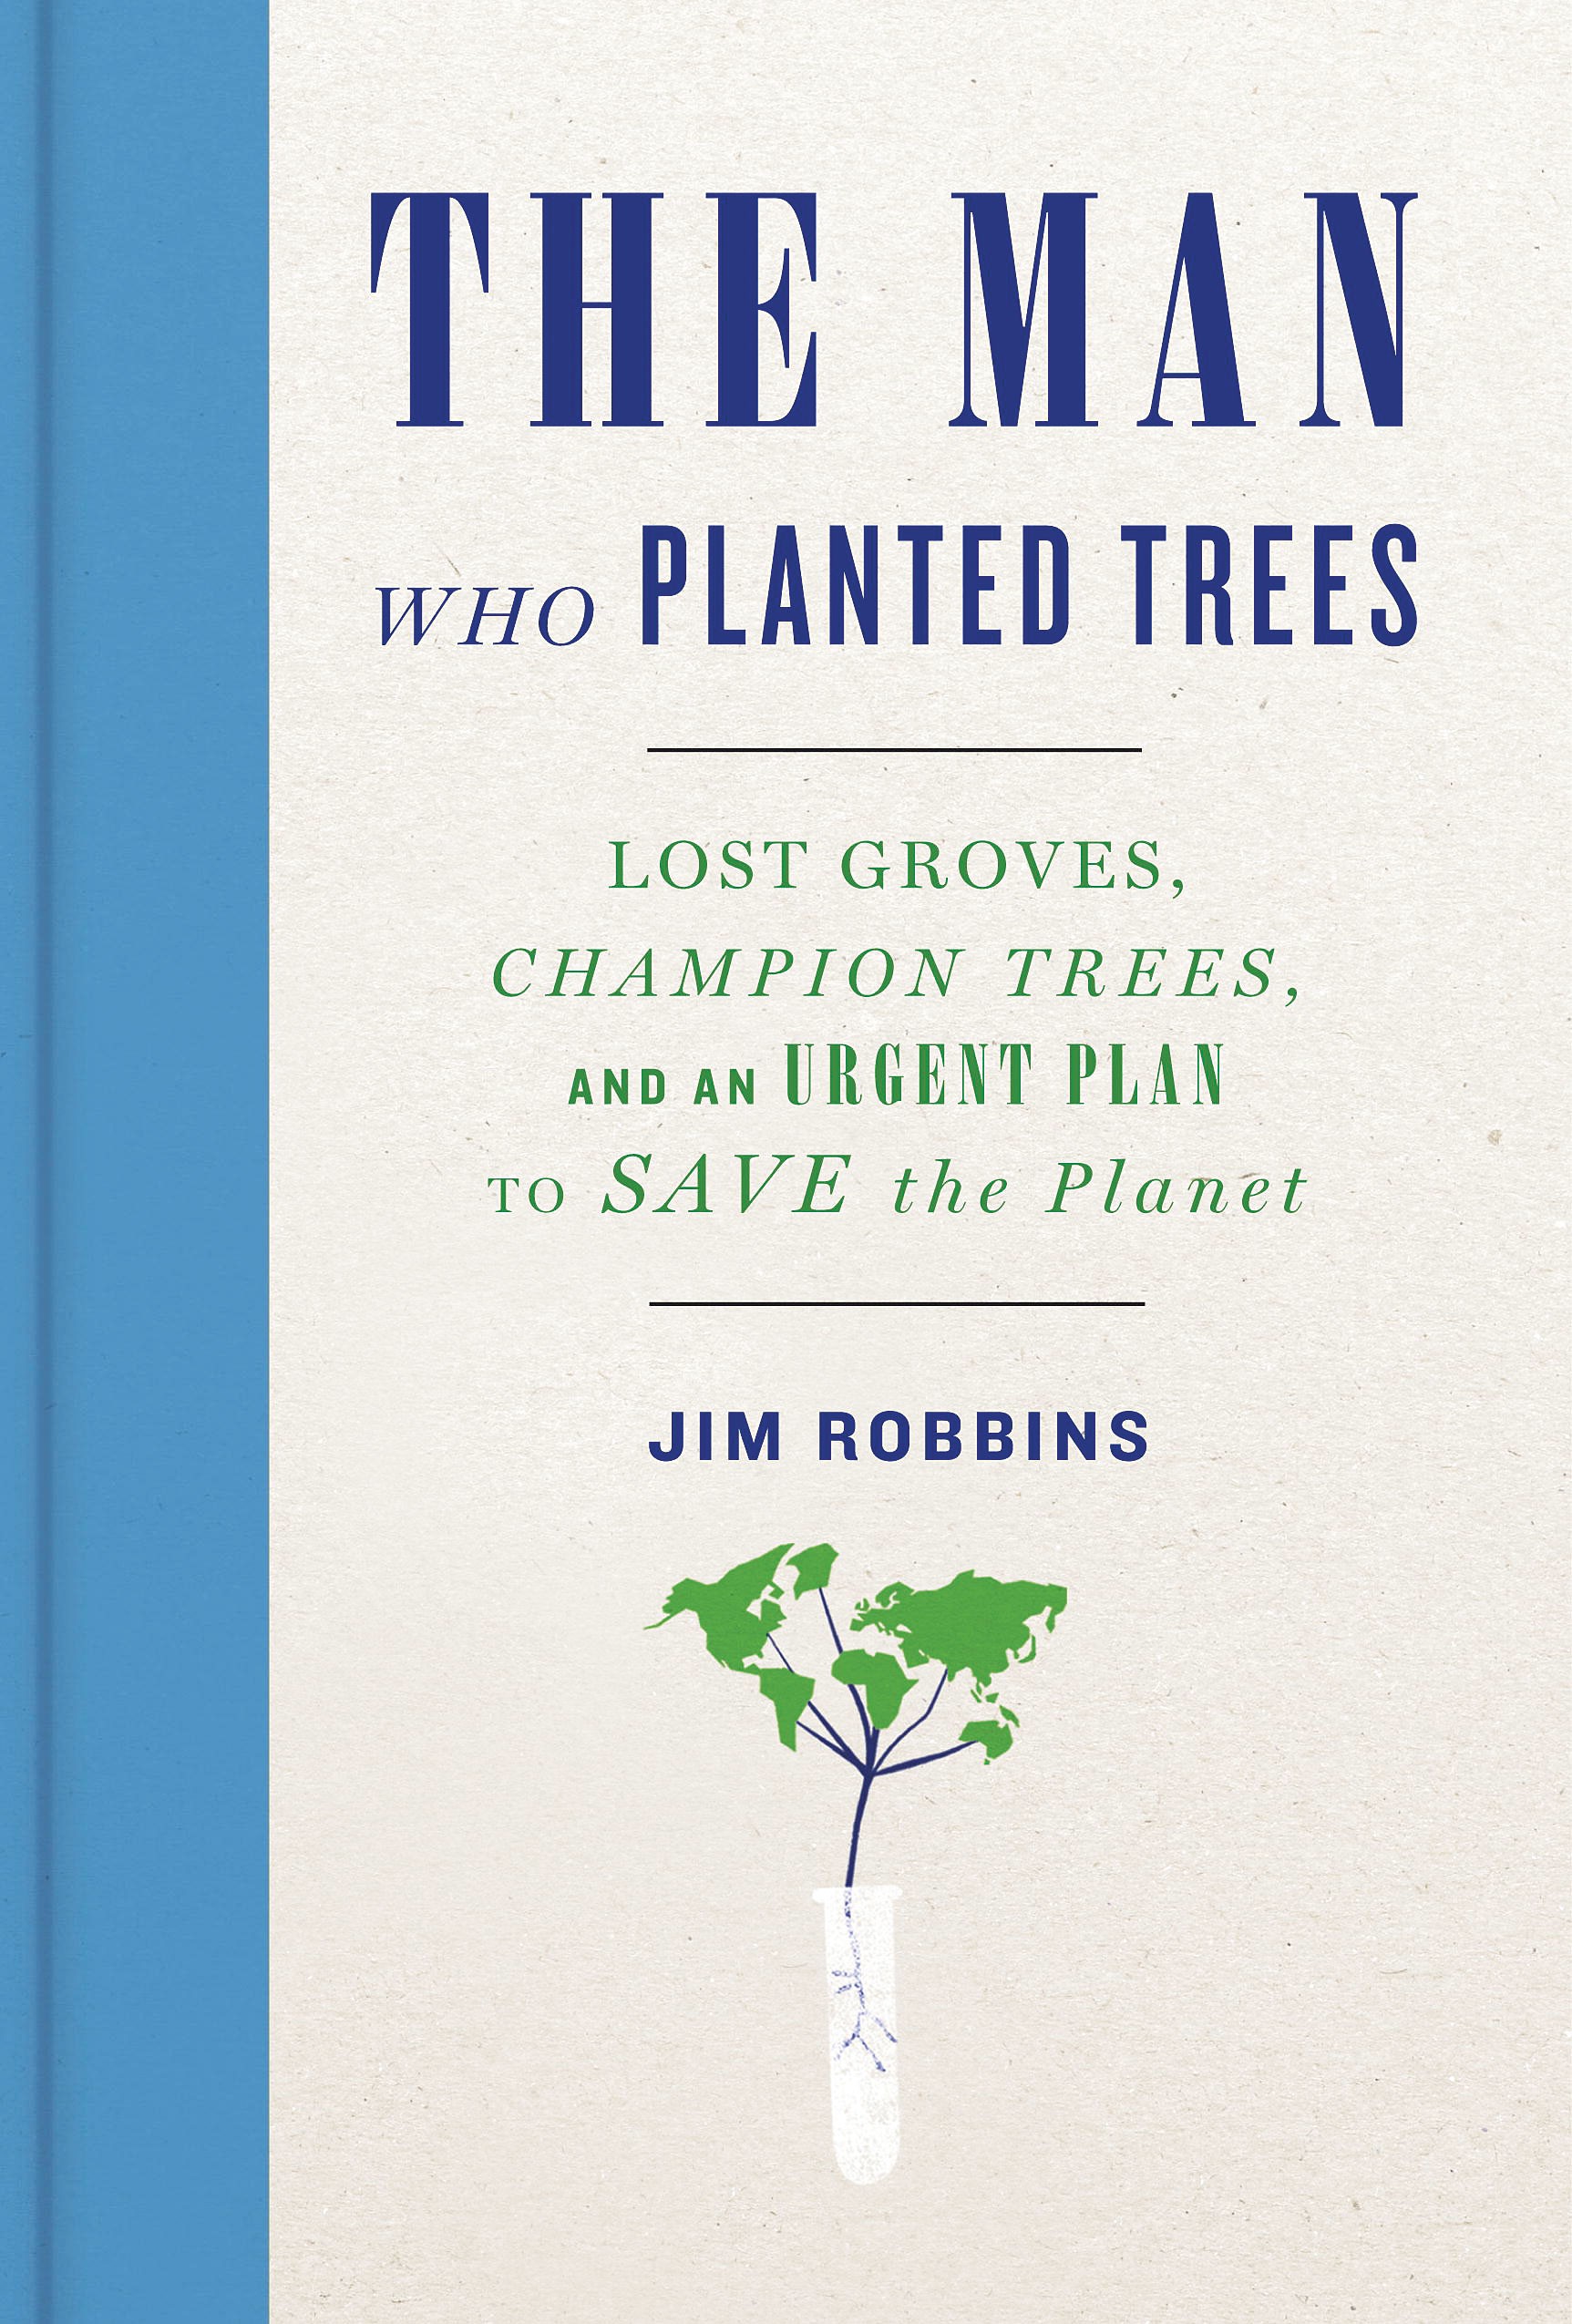 The Man Who Planted Trees by Jim Robbins